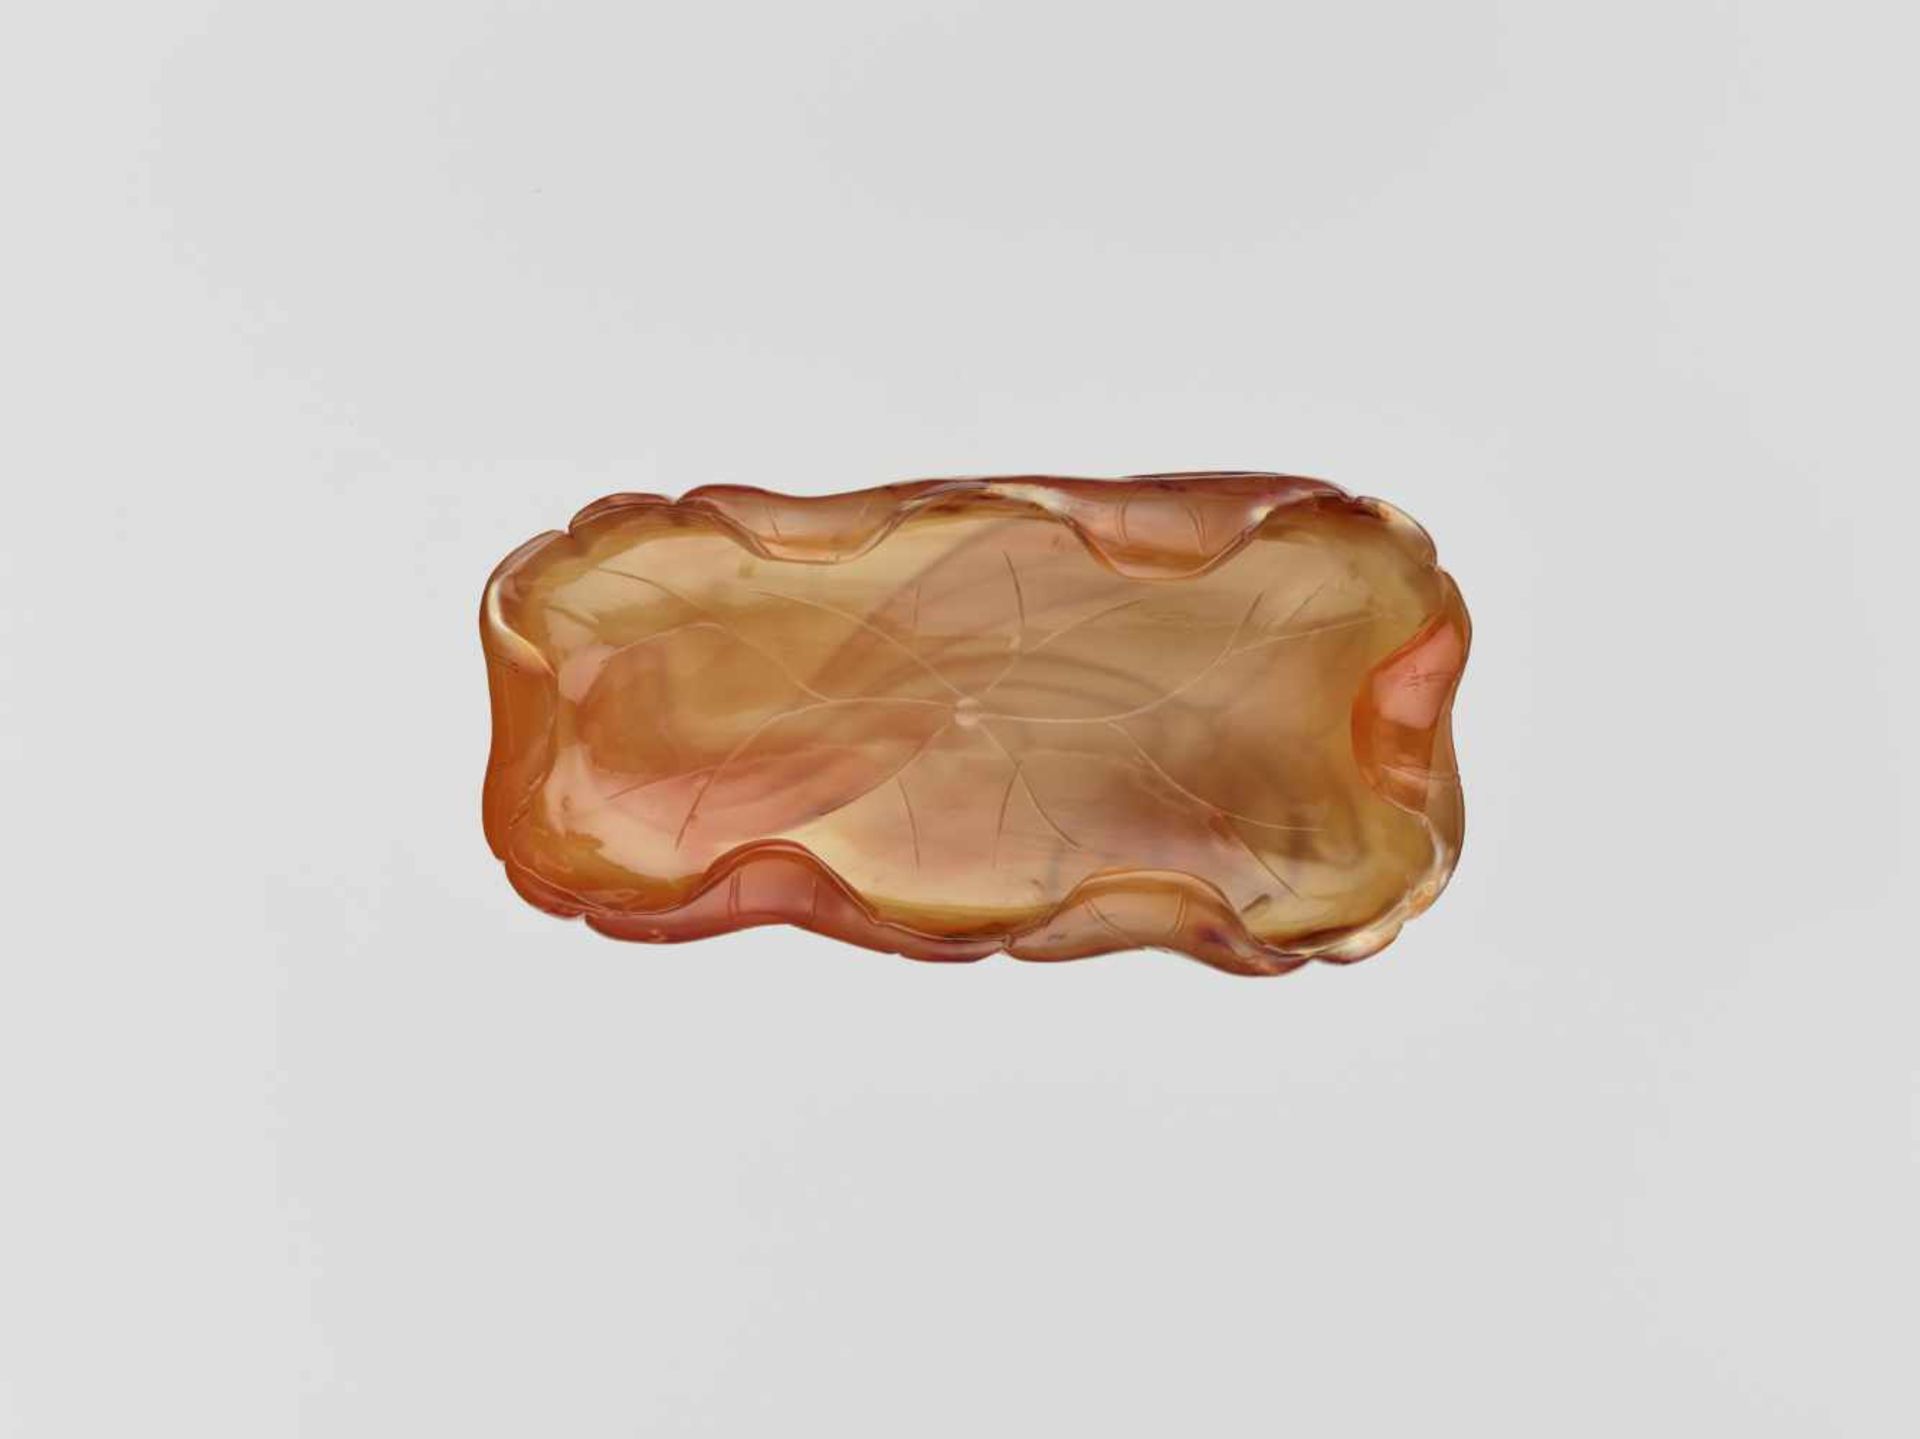 A CARVED AGATE ‘LOTUS’ WASHER QING DYNASTY, 18TH CENTURY Translucent agate of golden-brown and amber - Image 5 of 6